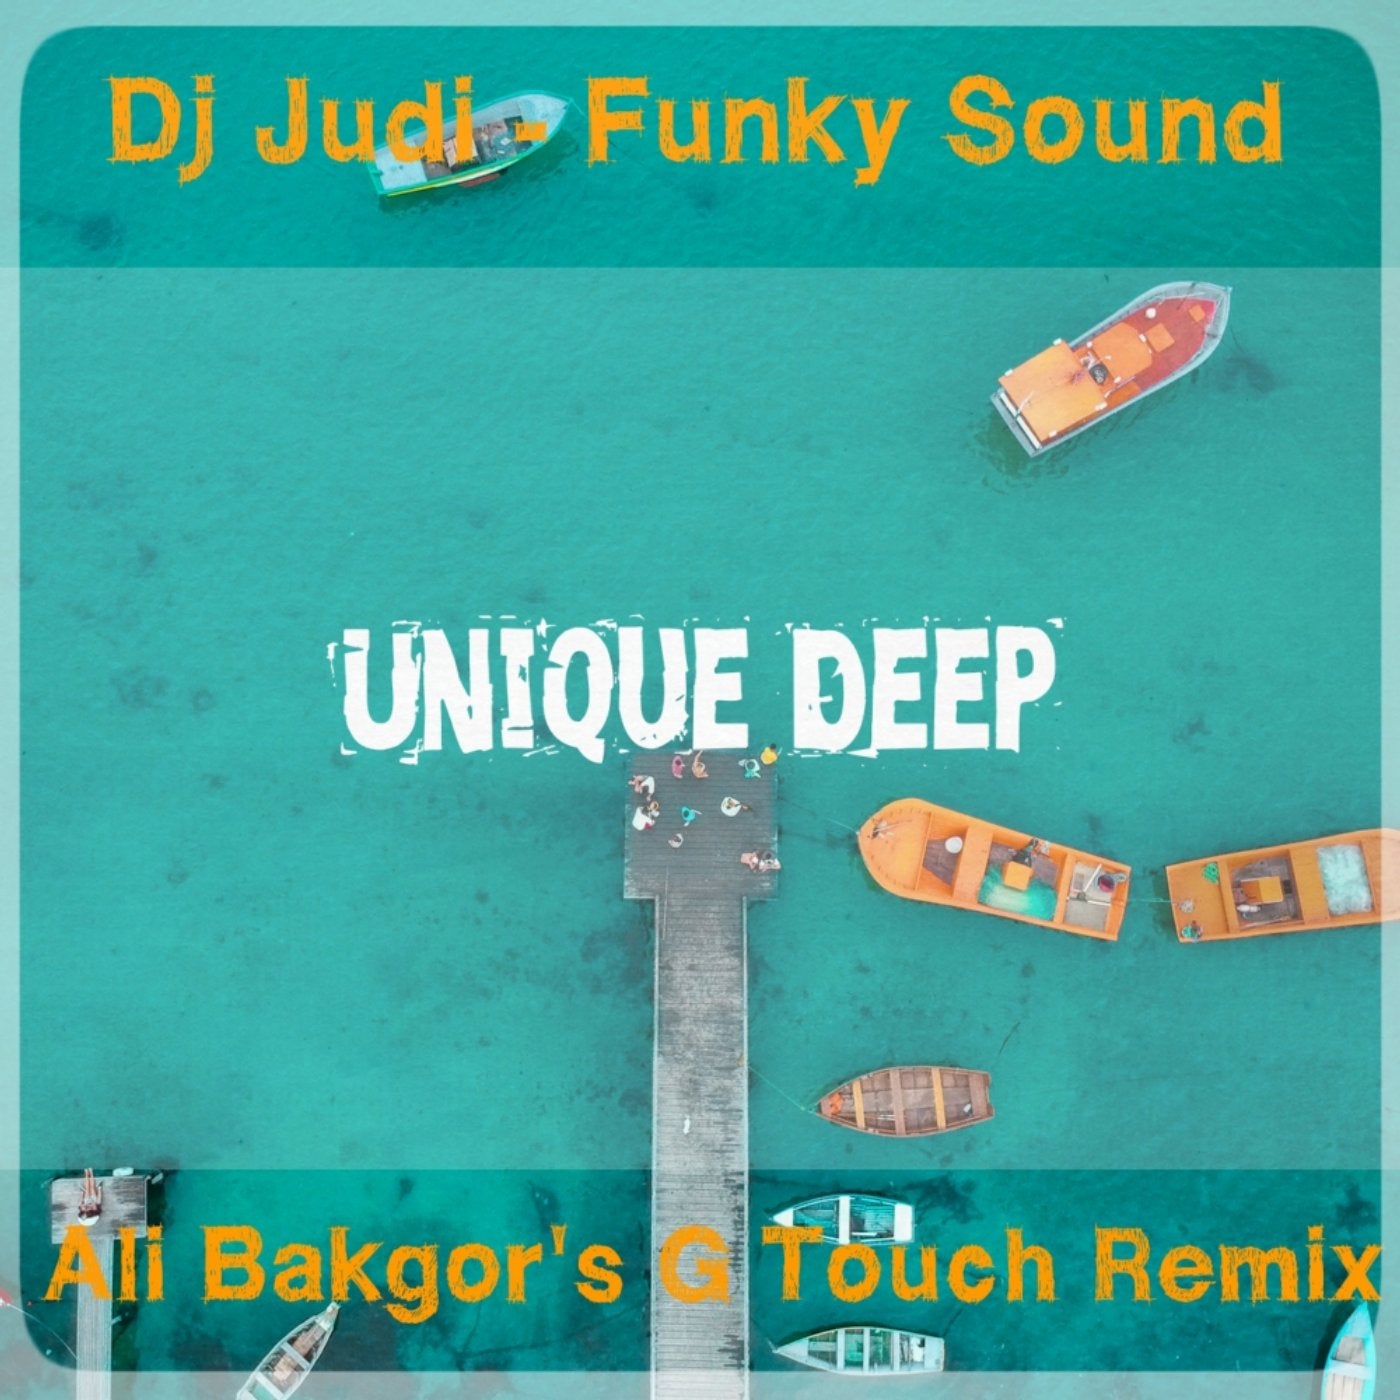 Funky Sound (Ali Bakgor's G Touch Remix)